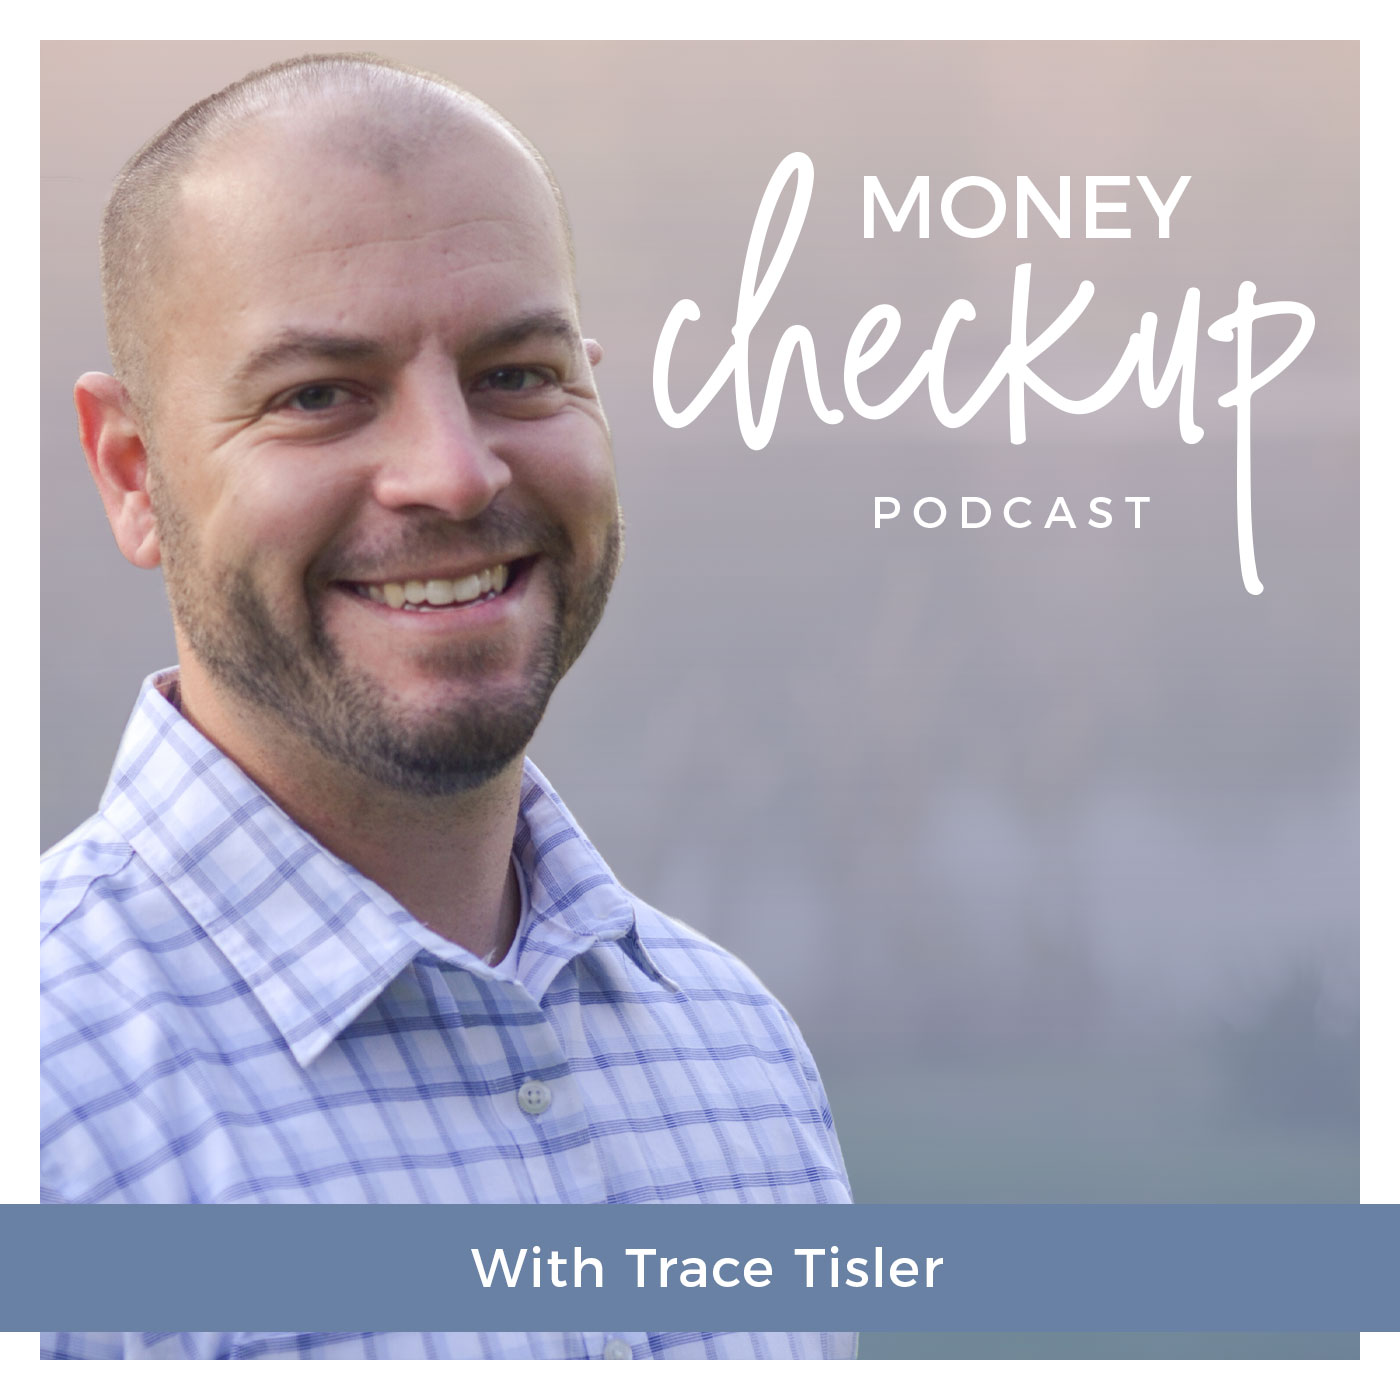 Money Checkup Podcast With Trace Tisler